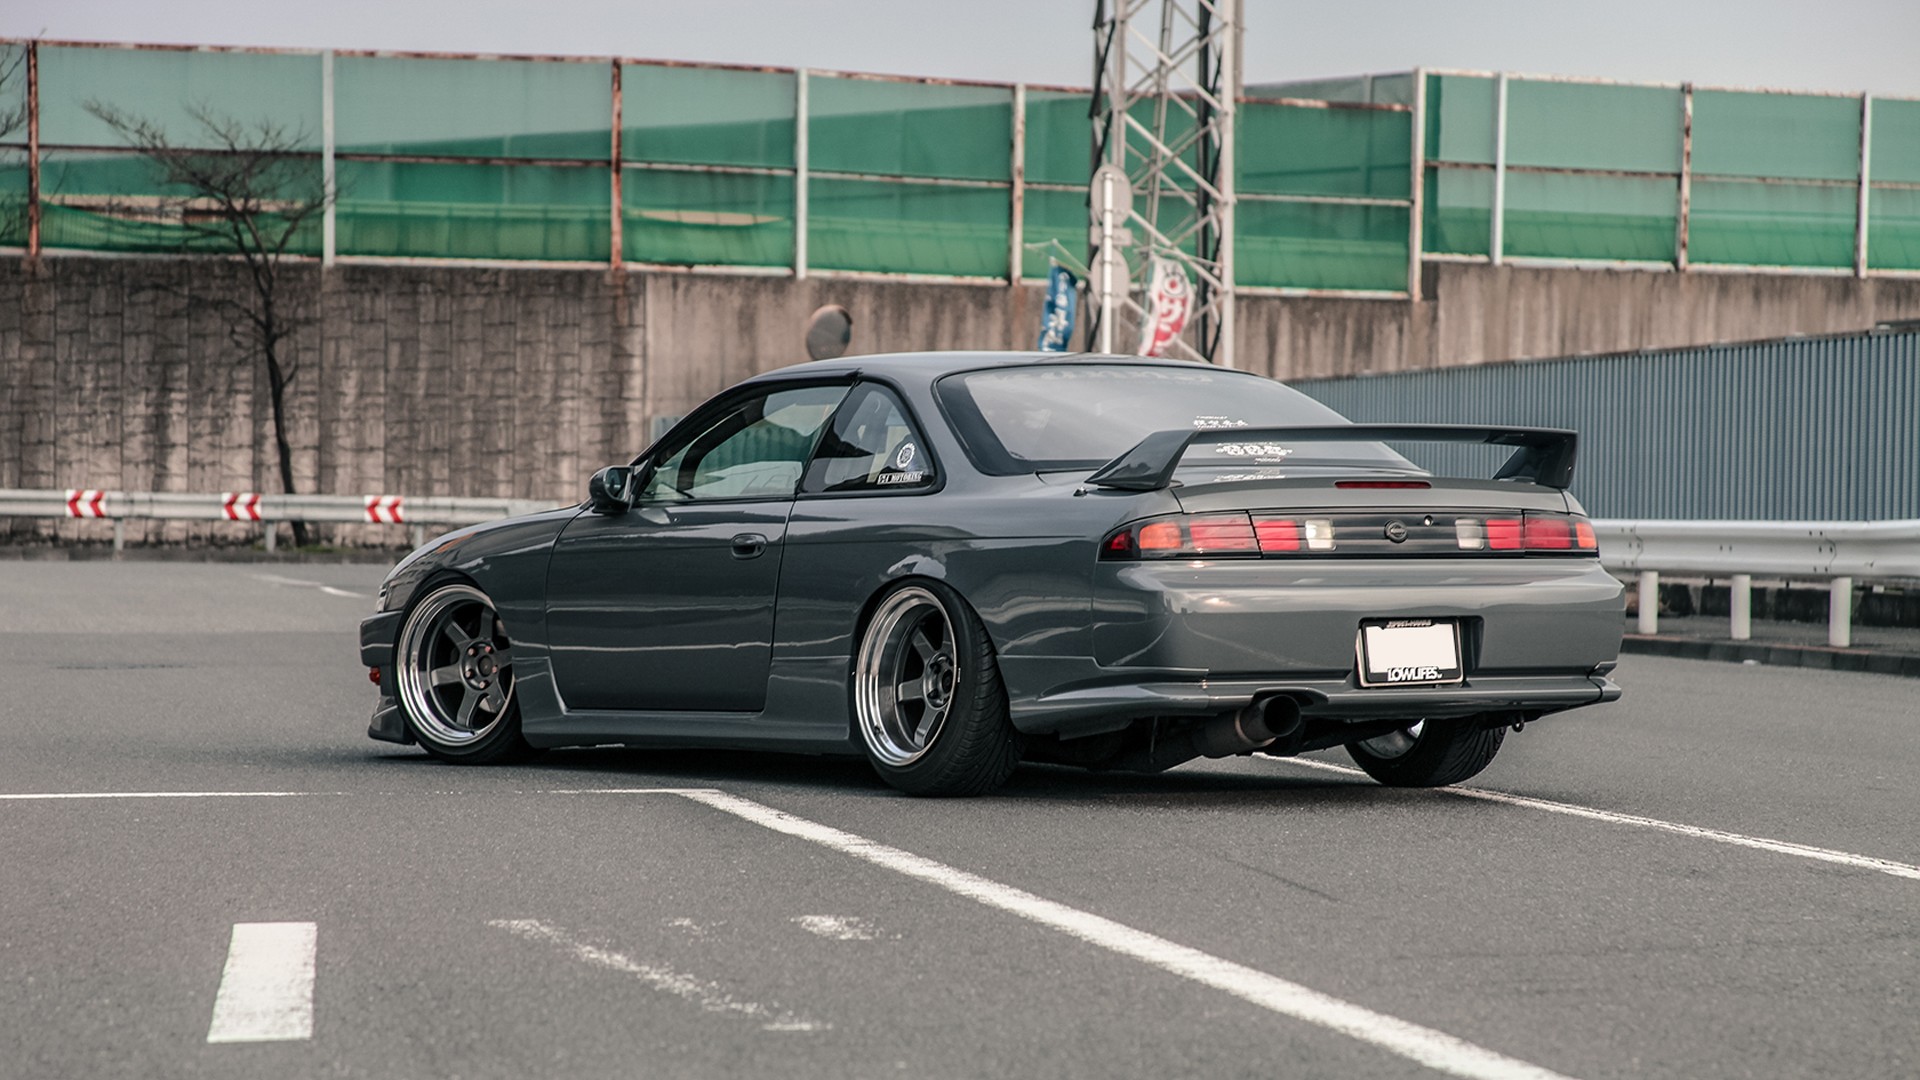 Cars Nissan Silvia Jdm S14 Wallpaper Car Pictures